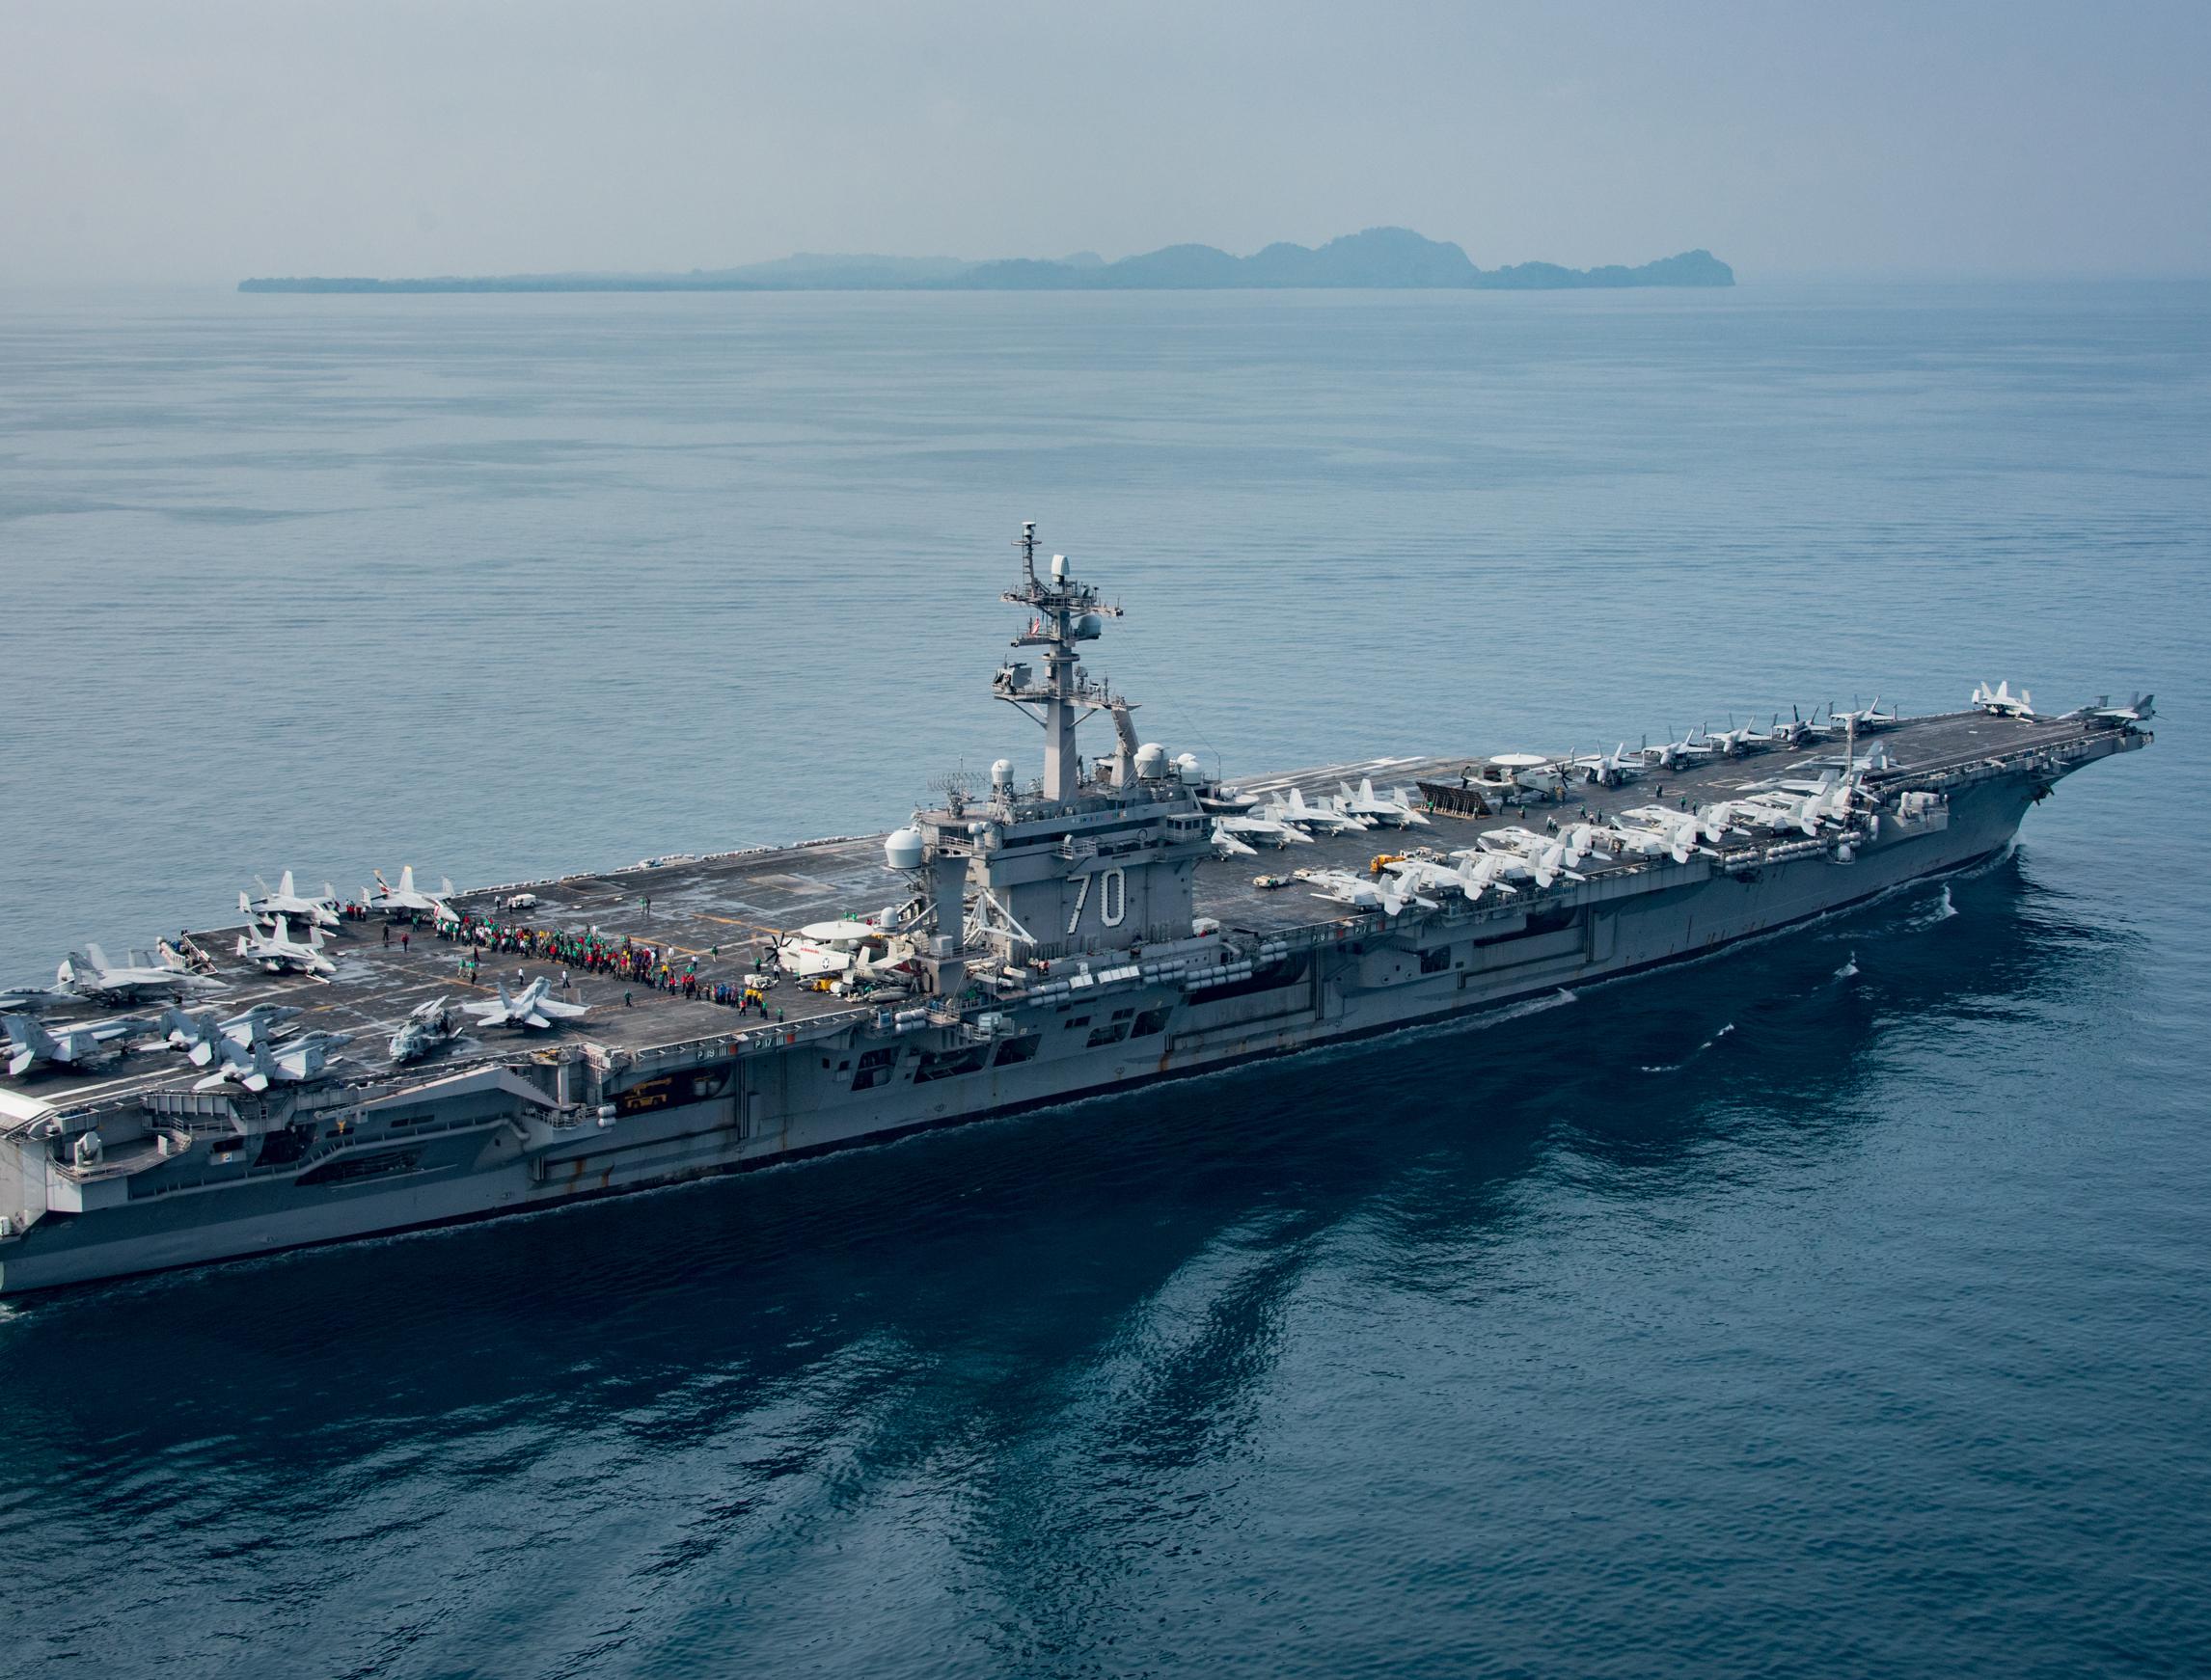 The aircraft carrier USS Carl Vinson (CVN 70) transits the Sunda Strait on 14 April 2017 in Indonesia